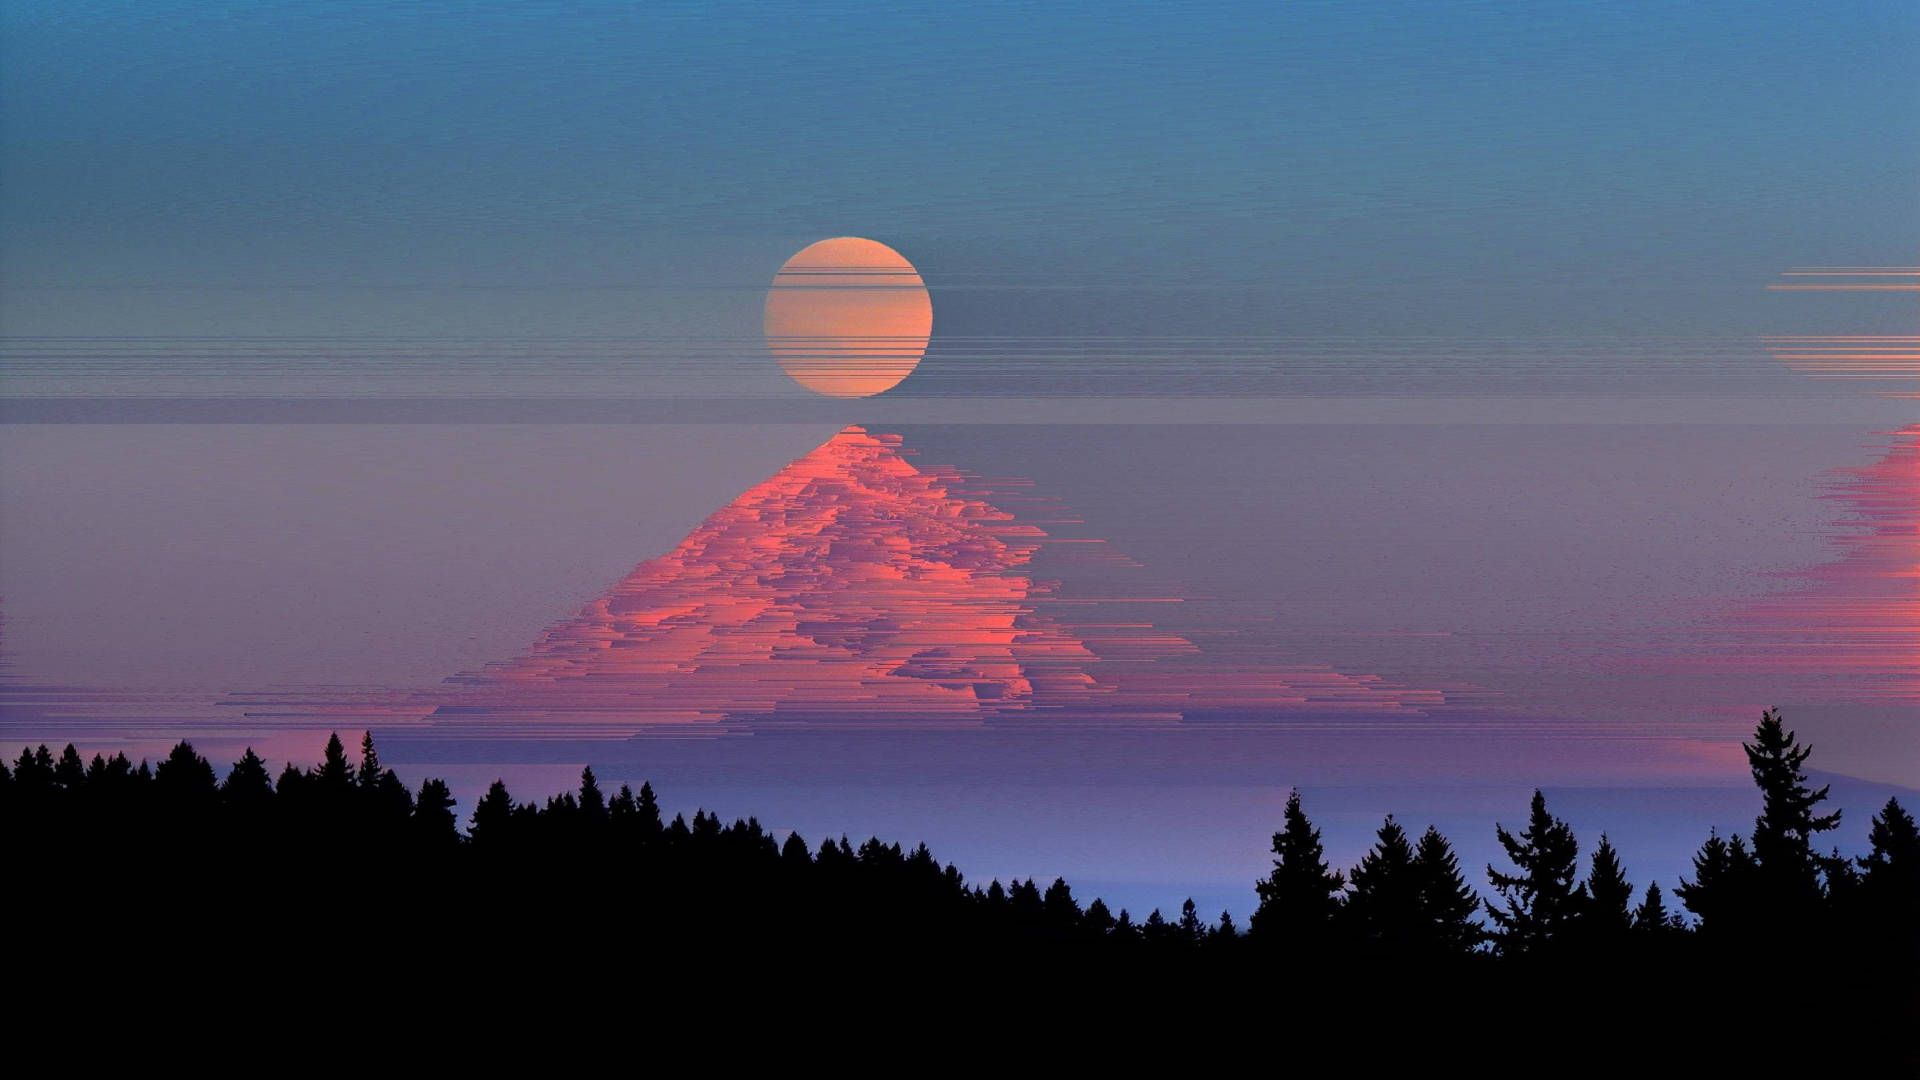 Glitch art of a mountain with a full moon - Nature